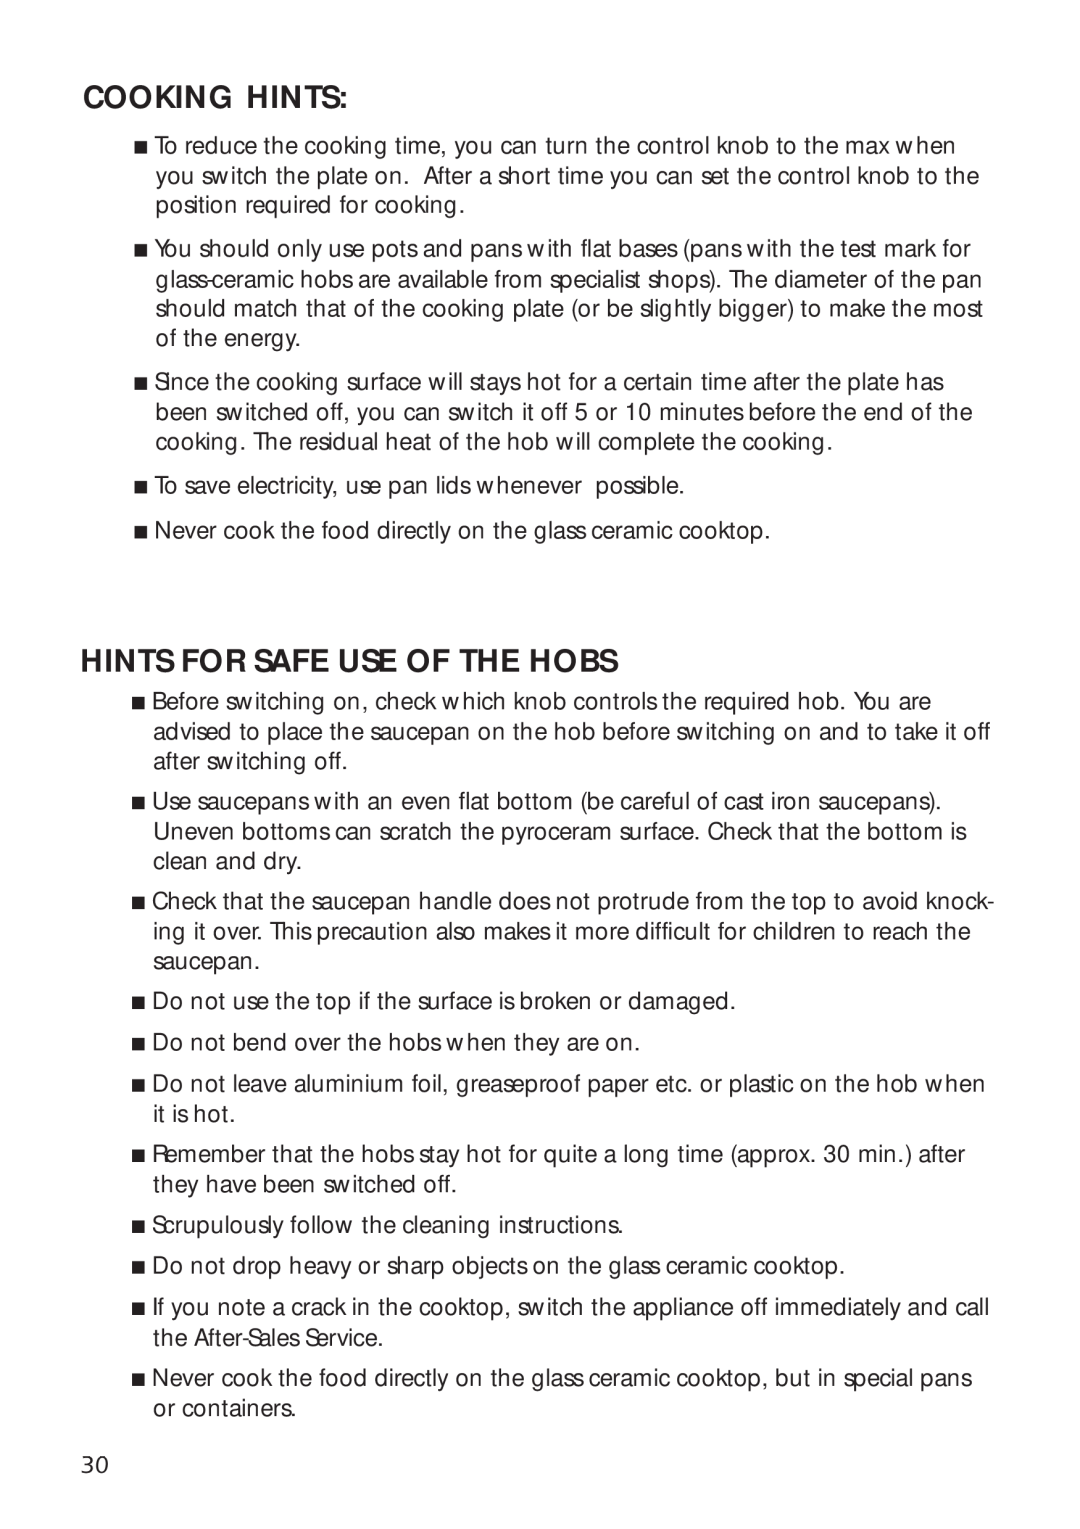 DeLonghi A 1346 G manual Hints For Safe Use Of The Hobs, Cooking Hints 